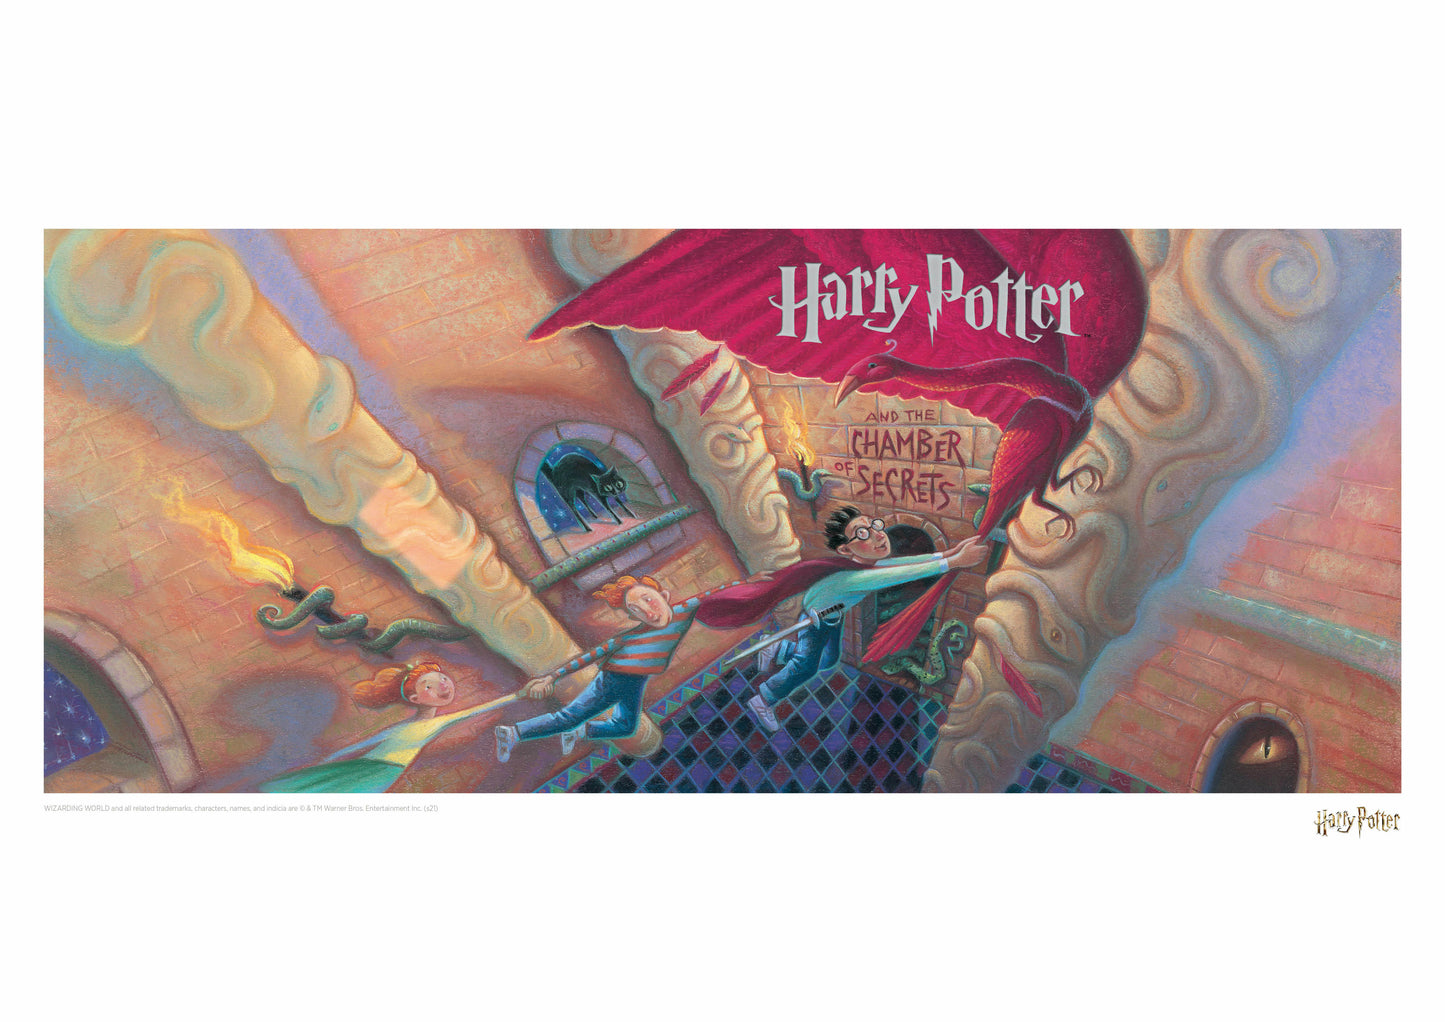 Harry Potter Book Cover - The Chamber of Secrets Artwork